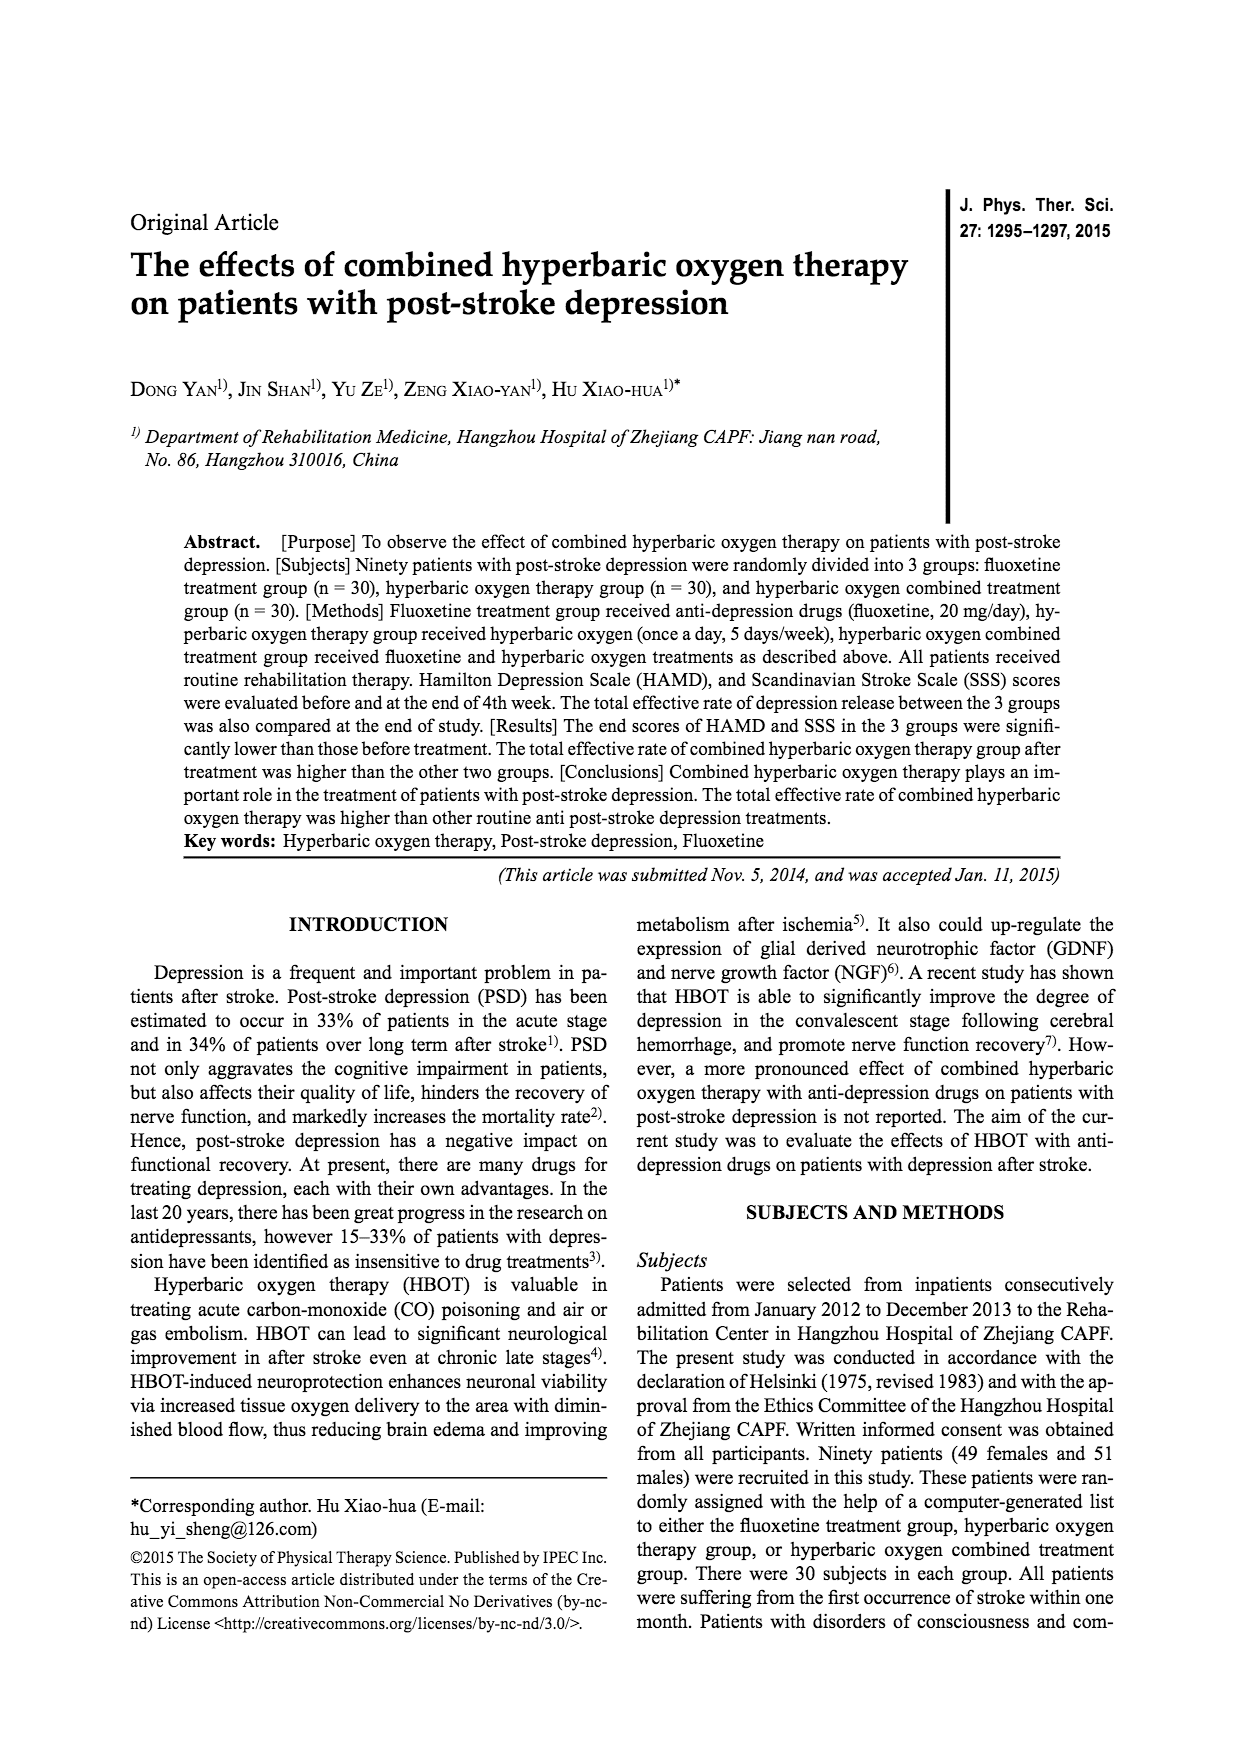 effects of combined hyperbaric oxygen therapy patients post stroke depresion, depression, depression symptoms, postpartum, postpartum depression signs of depression, clinical depression, antidepressants, major depressive disorder, manic depression, seasonal affective disorder, seasonal depression, high functioning depression, major depressive disorder symptoms, types of depression, postpartum psychosis